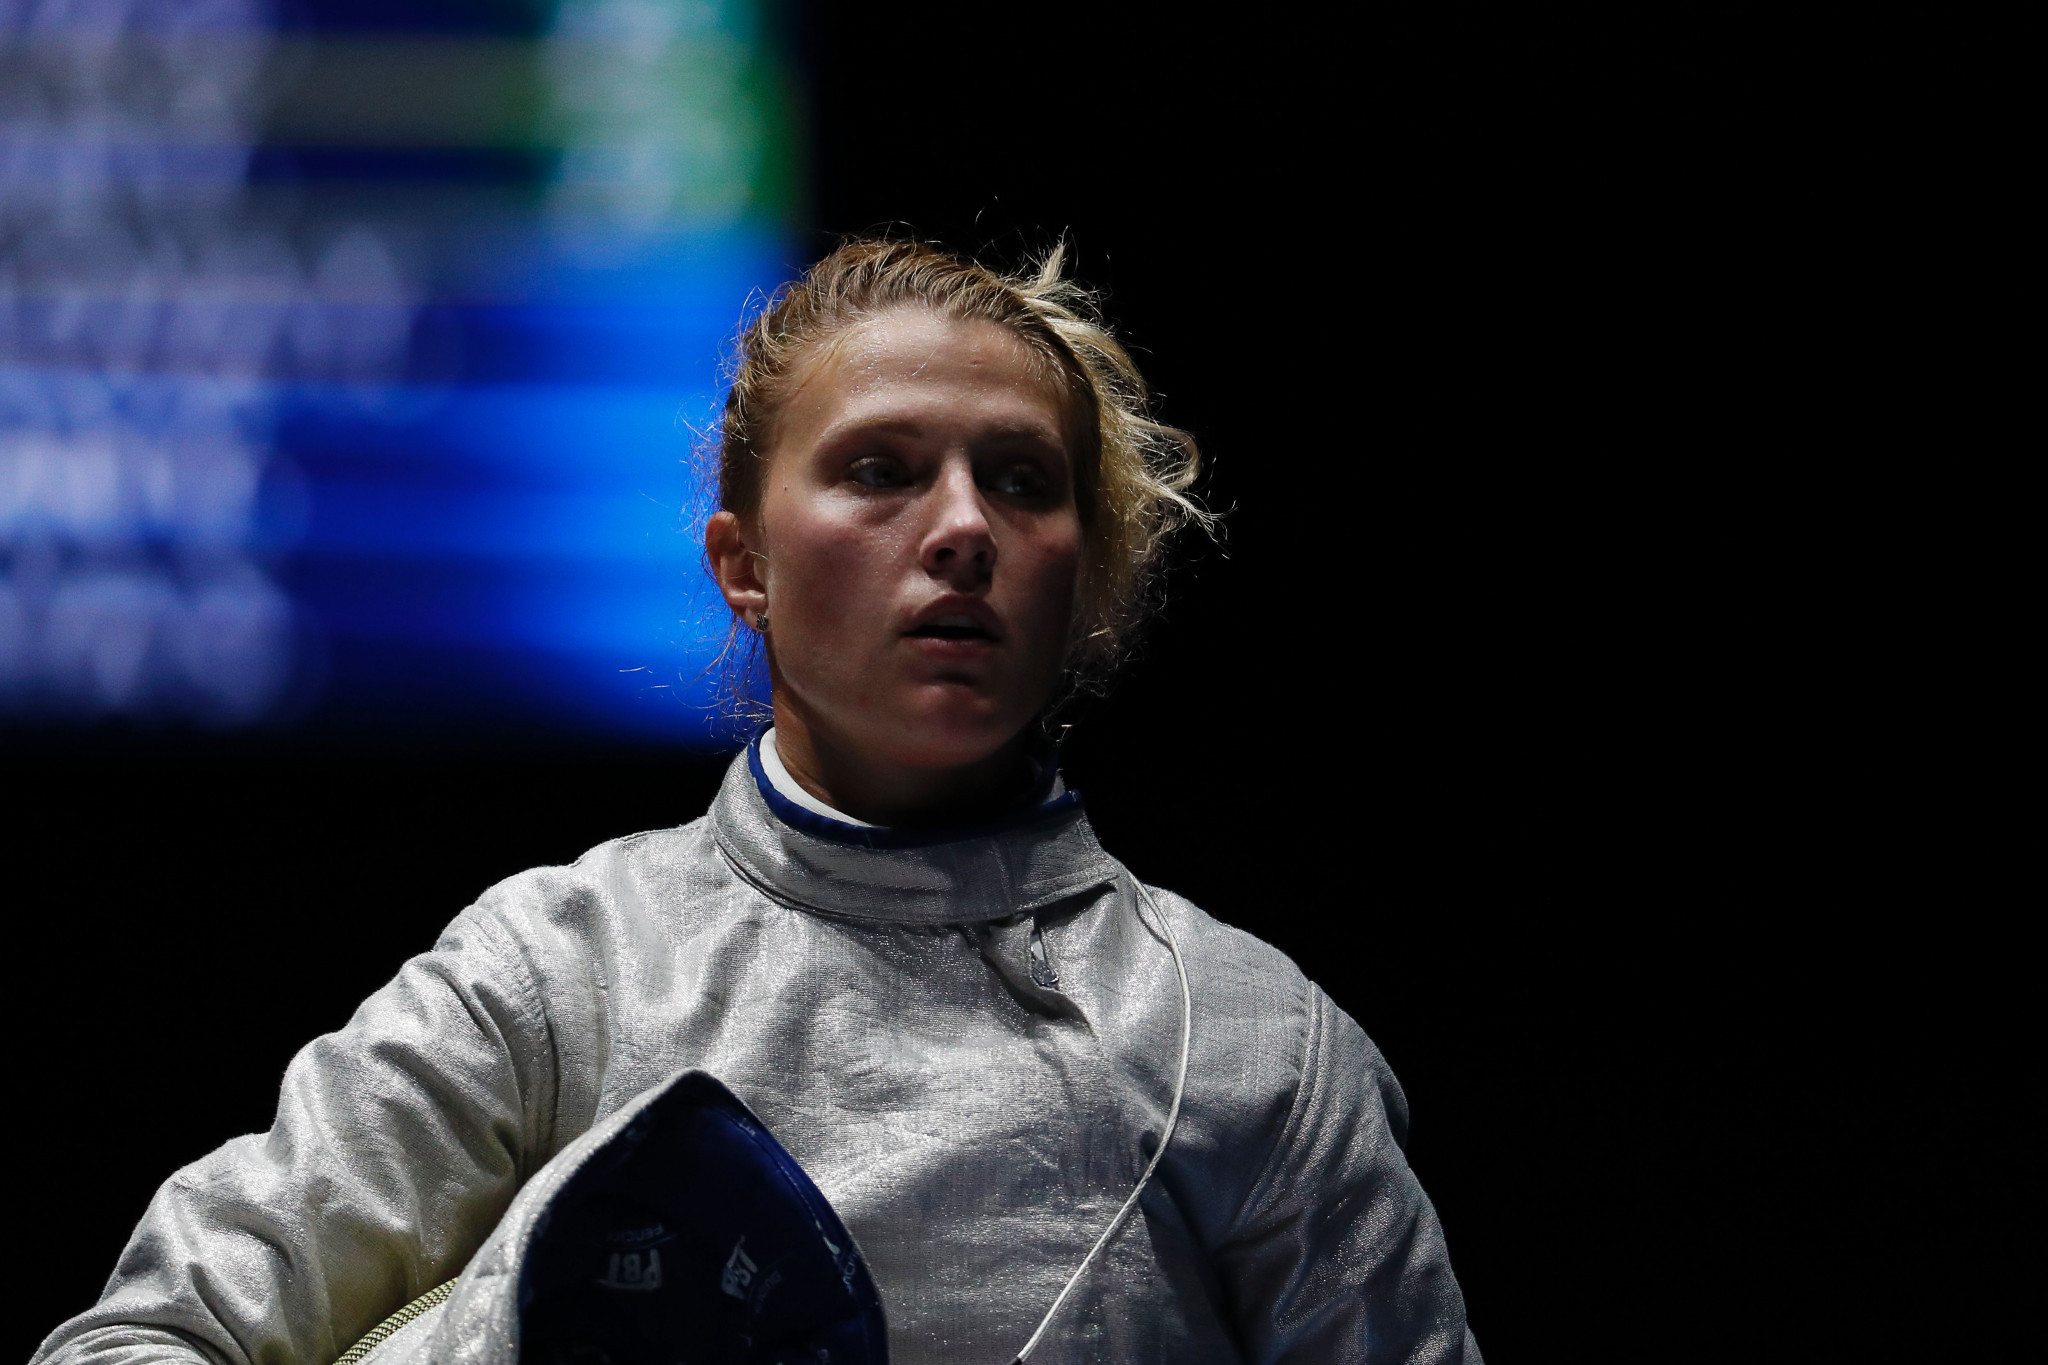 Ukraine's Olga Kharlan will clash with Marissa Ponich of Canada in her opening bout ©Getty Images